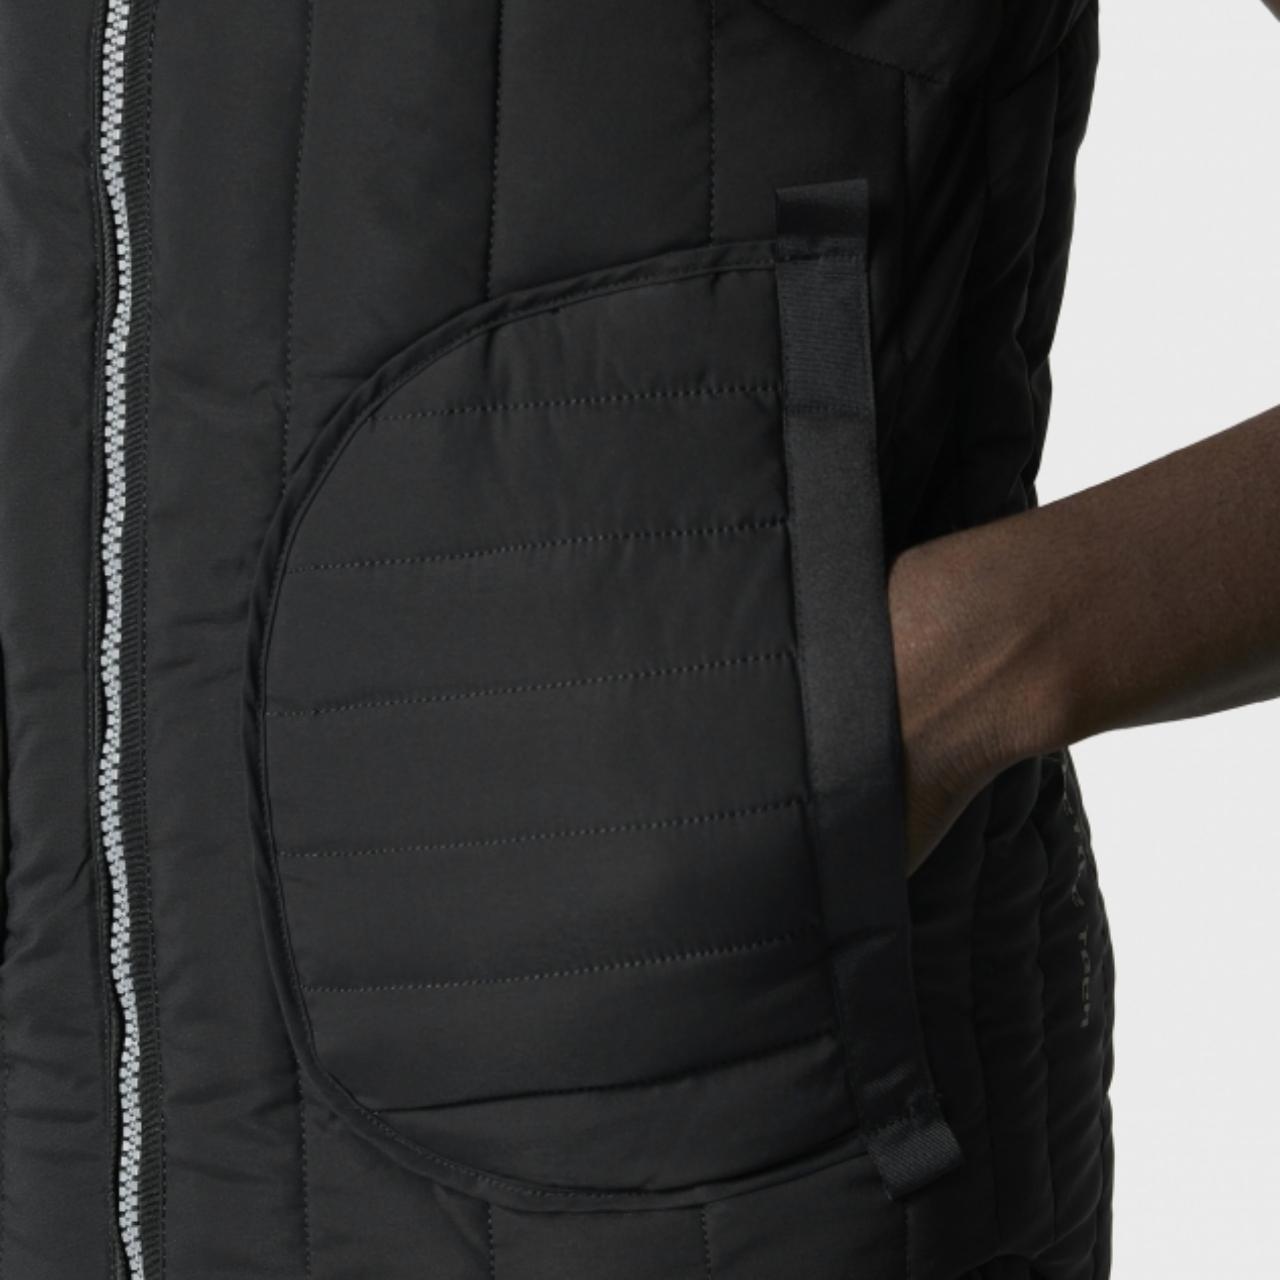 Product Image 3 - 883 POLICE 

AVANT GILET BLACK

The